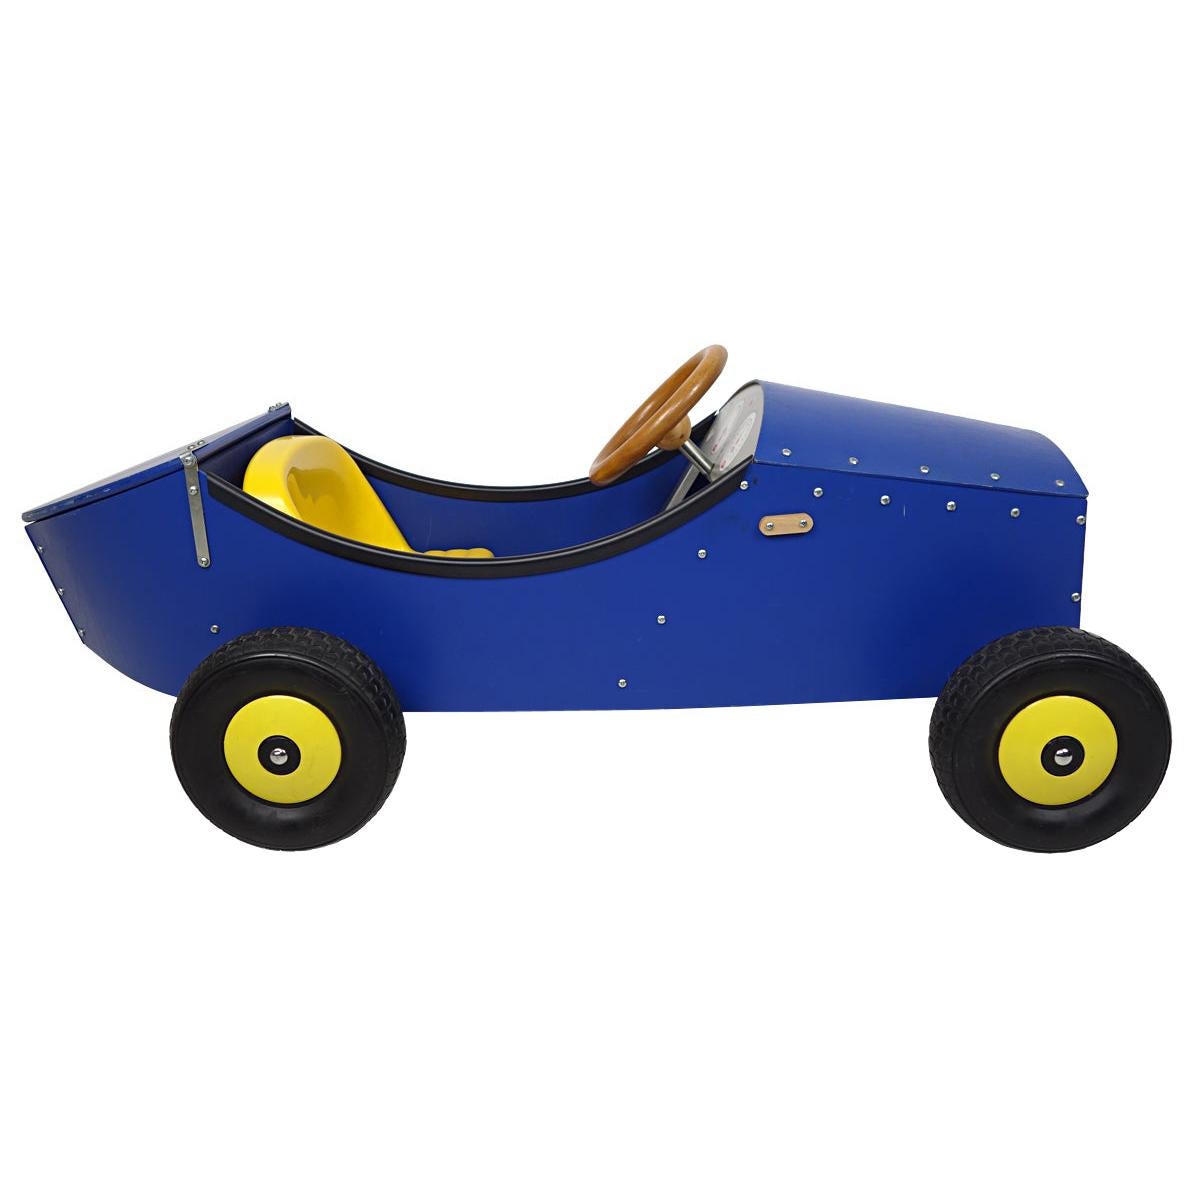 Post-Modern Limited Edition Pedal Car Vilac by Philippe Starck for La Redoute